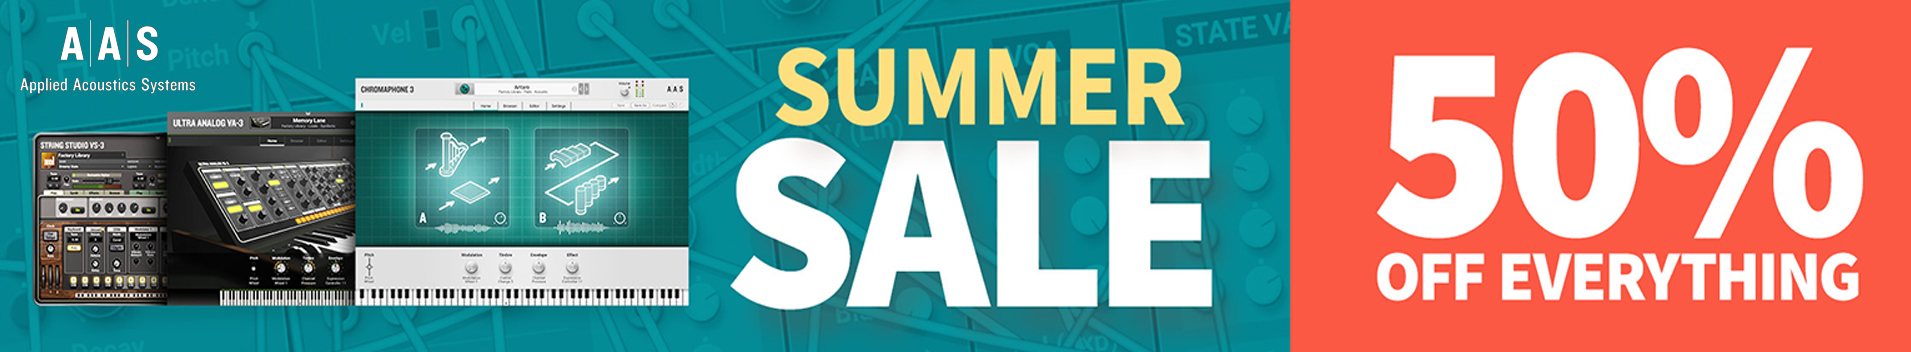 Applied   Acoustics Systems Summer Sale! 50% Off Everything!